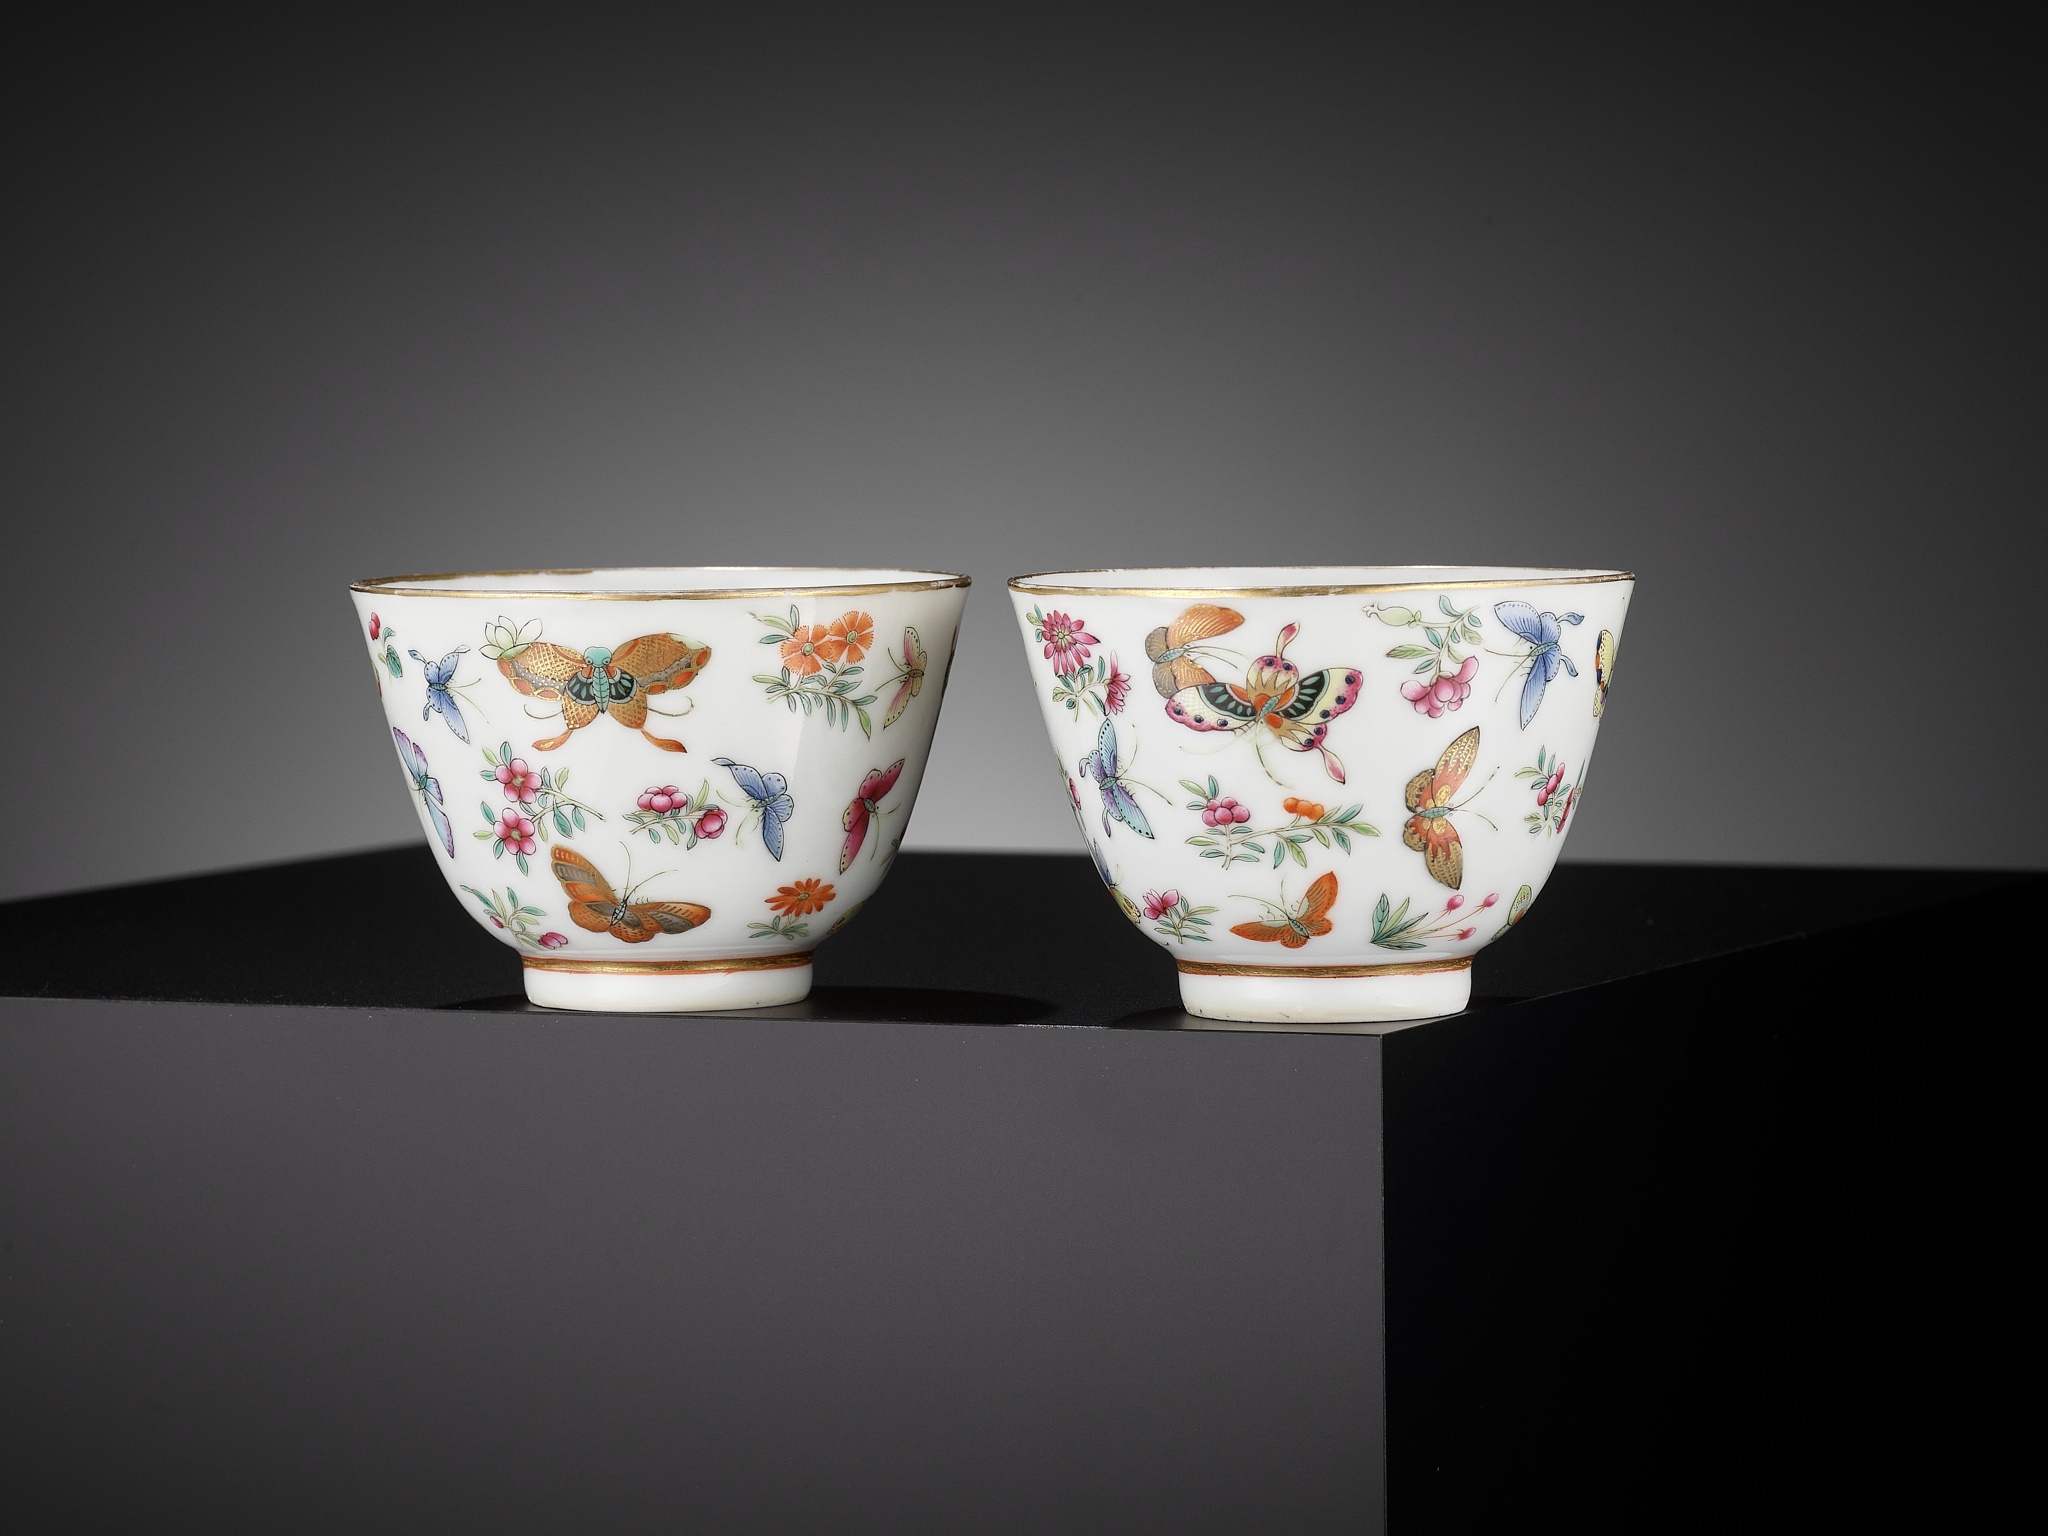 A SUPERB PAIR OF FAMILLE ROSE 'BUTTERFLY' BOWLS, GUANGXU MARKS AND PERIOD - Image 9 of 13